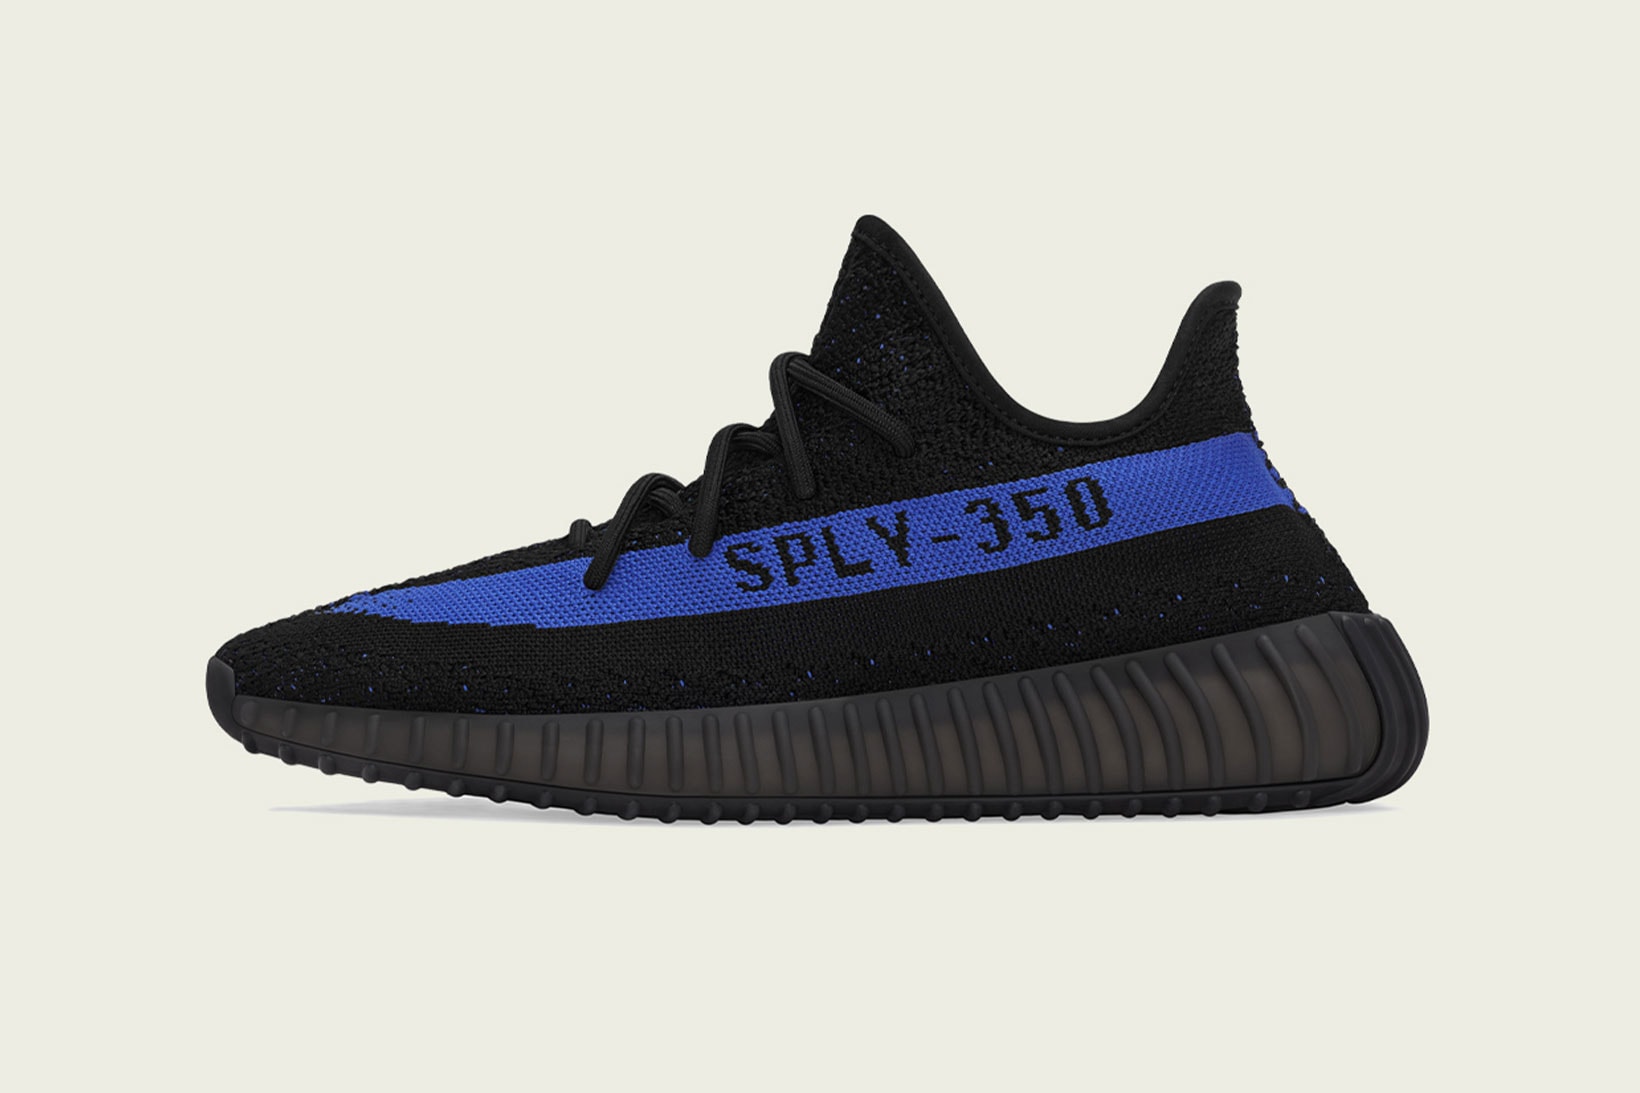 Kanye West adidas YEEZY BOOST 350 V2 Dazzling Blue Side View